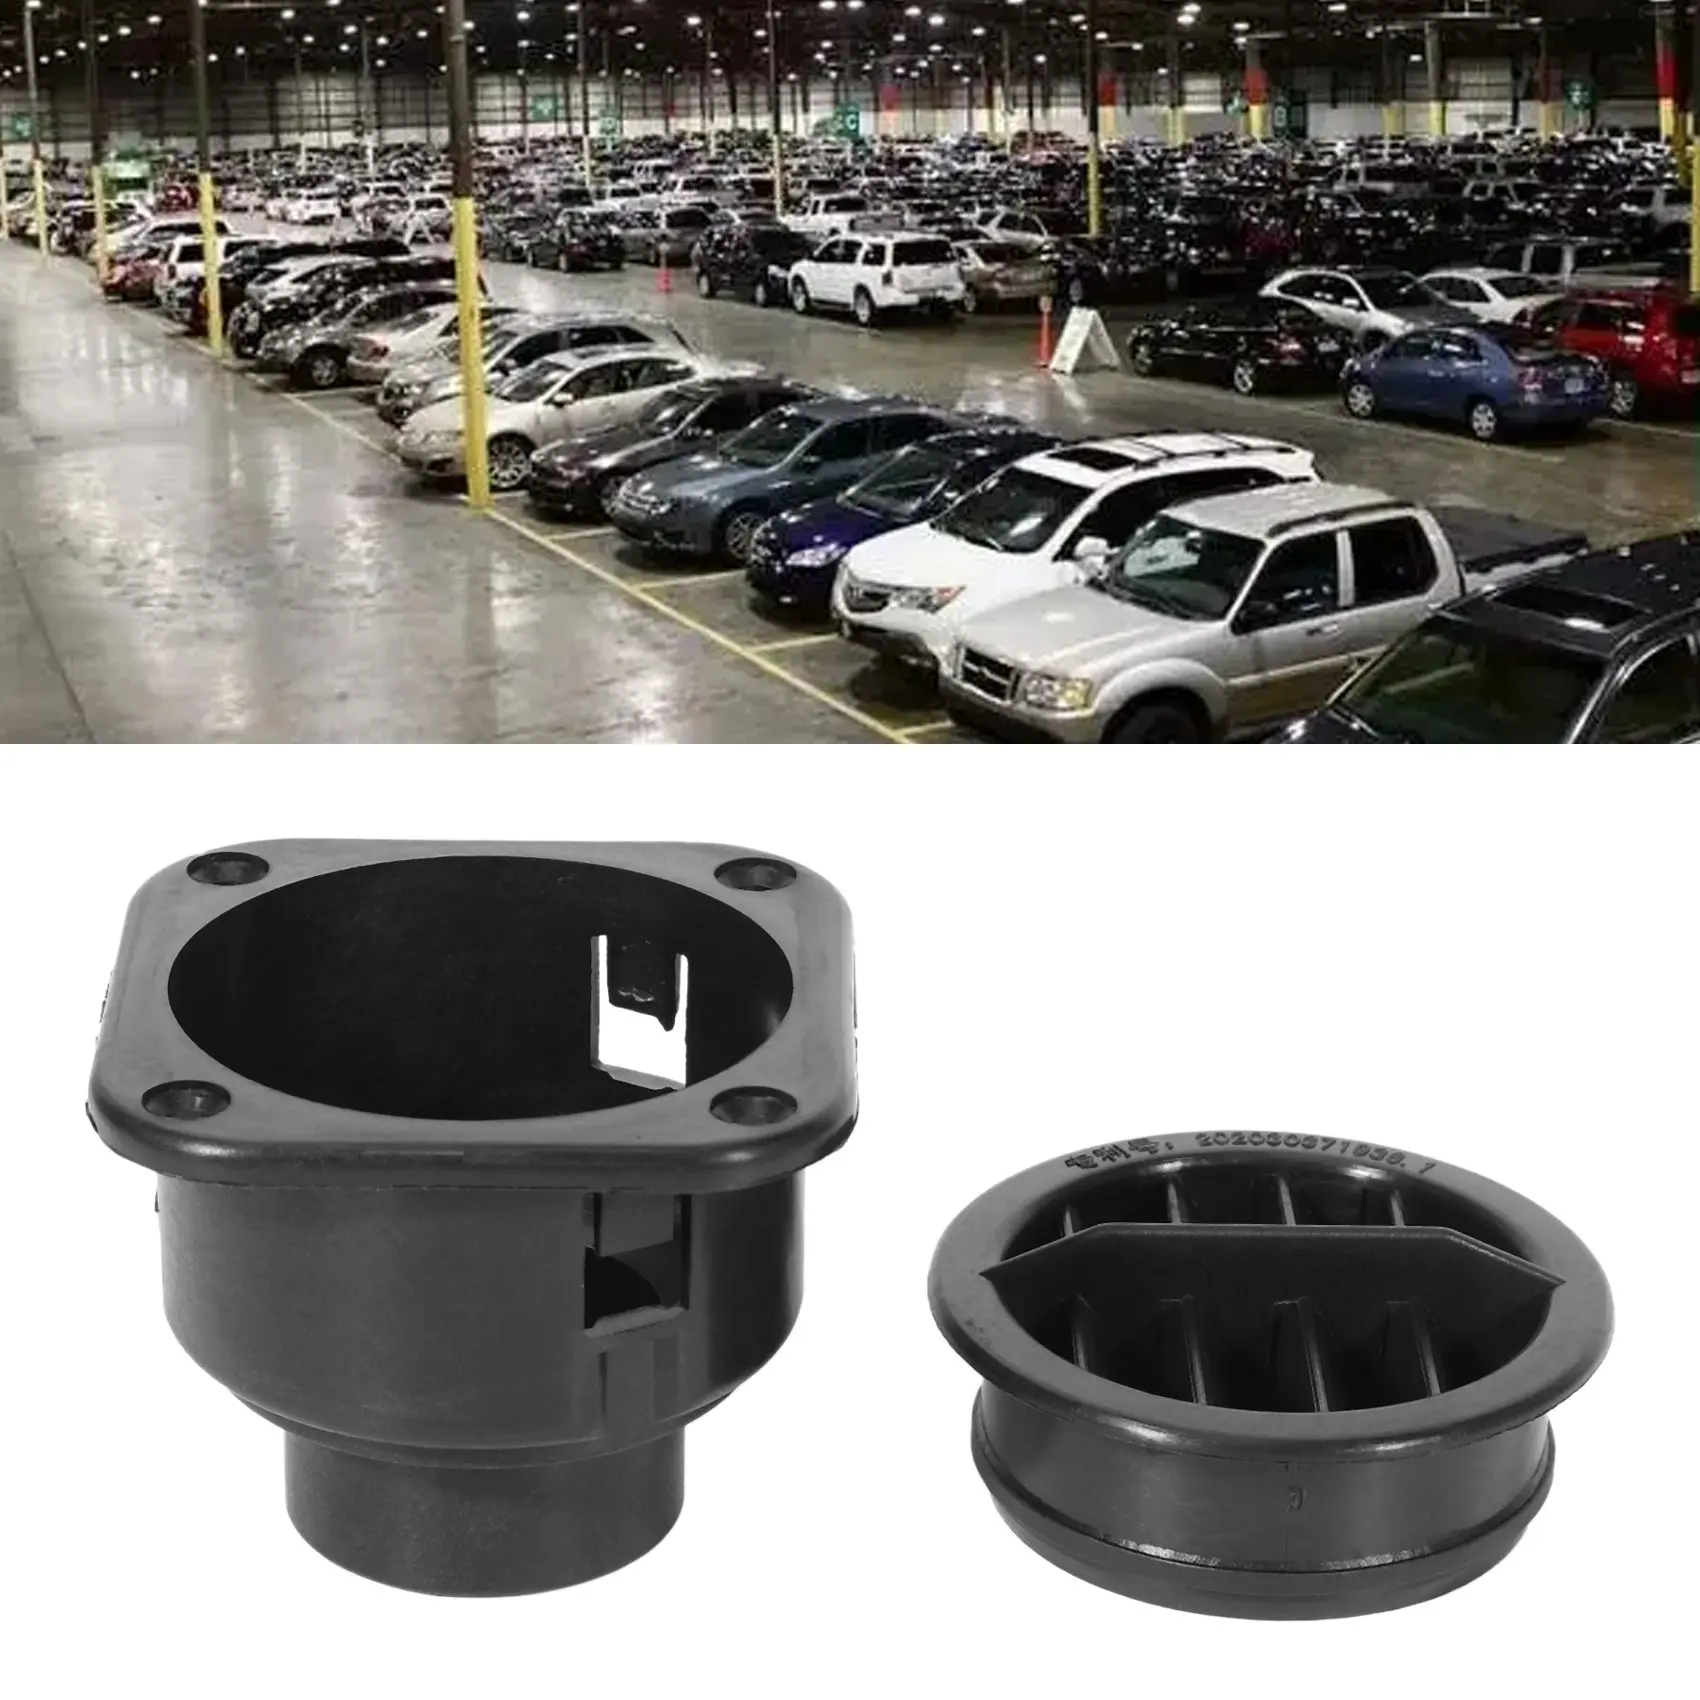 

42mm Car Air Parking Heater Duct Pipe Connector Warm Air Vent Outlet for Webasto Eberspacher Propex